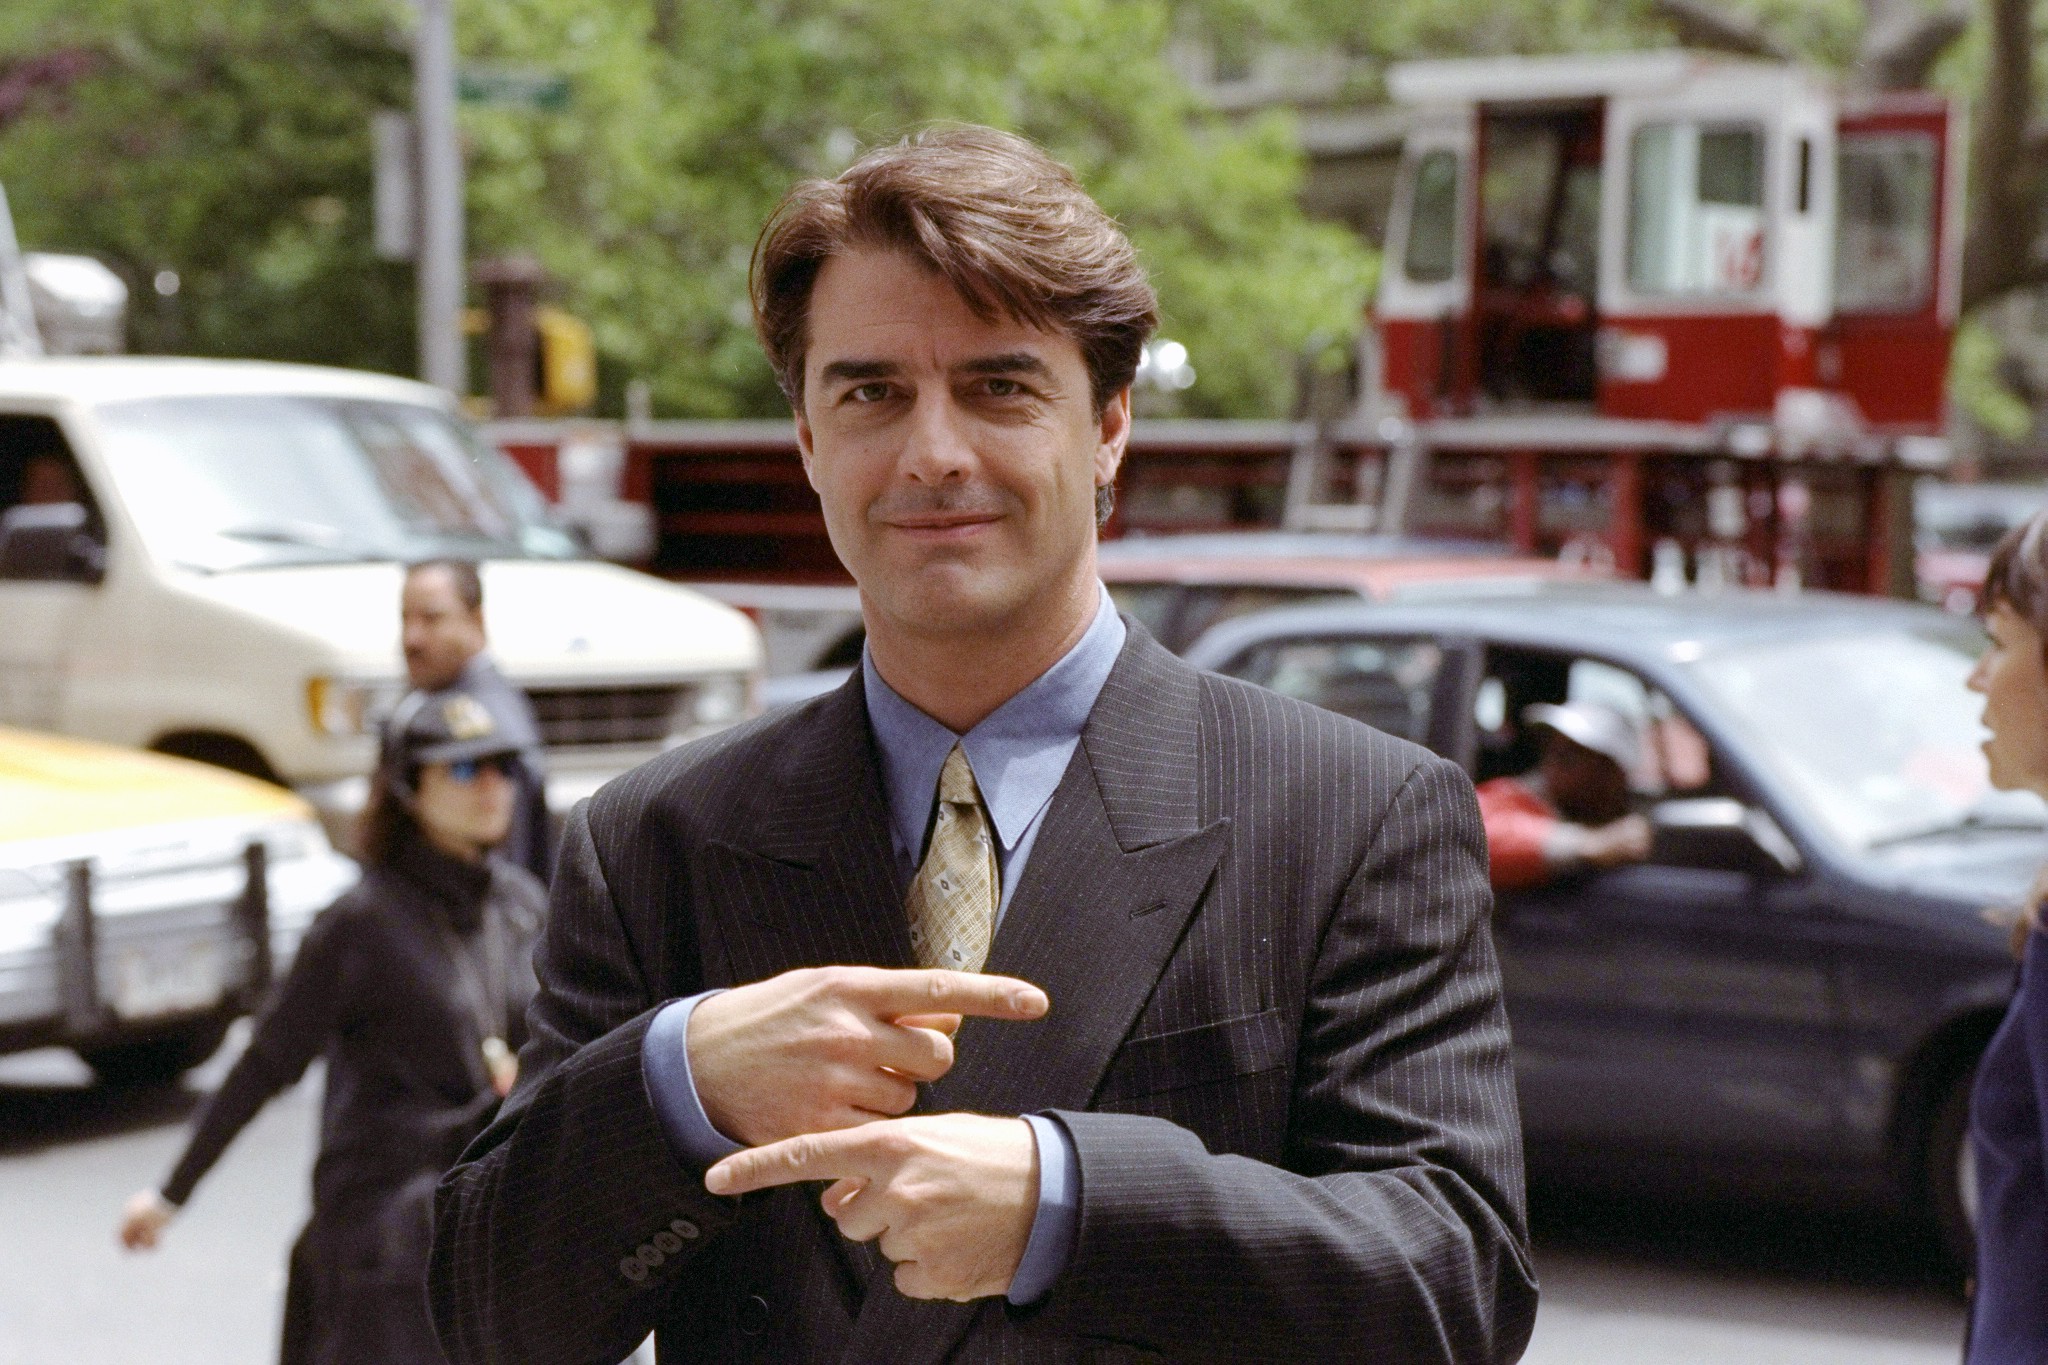 Chris Noth as Mr. Big poses for a photo on Broadway while filming 'Sex and the CIty: The Movie'